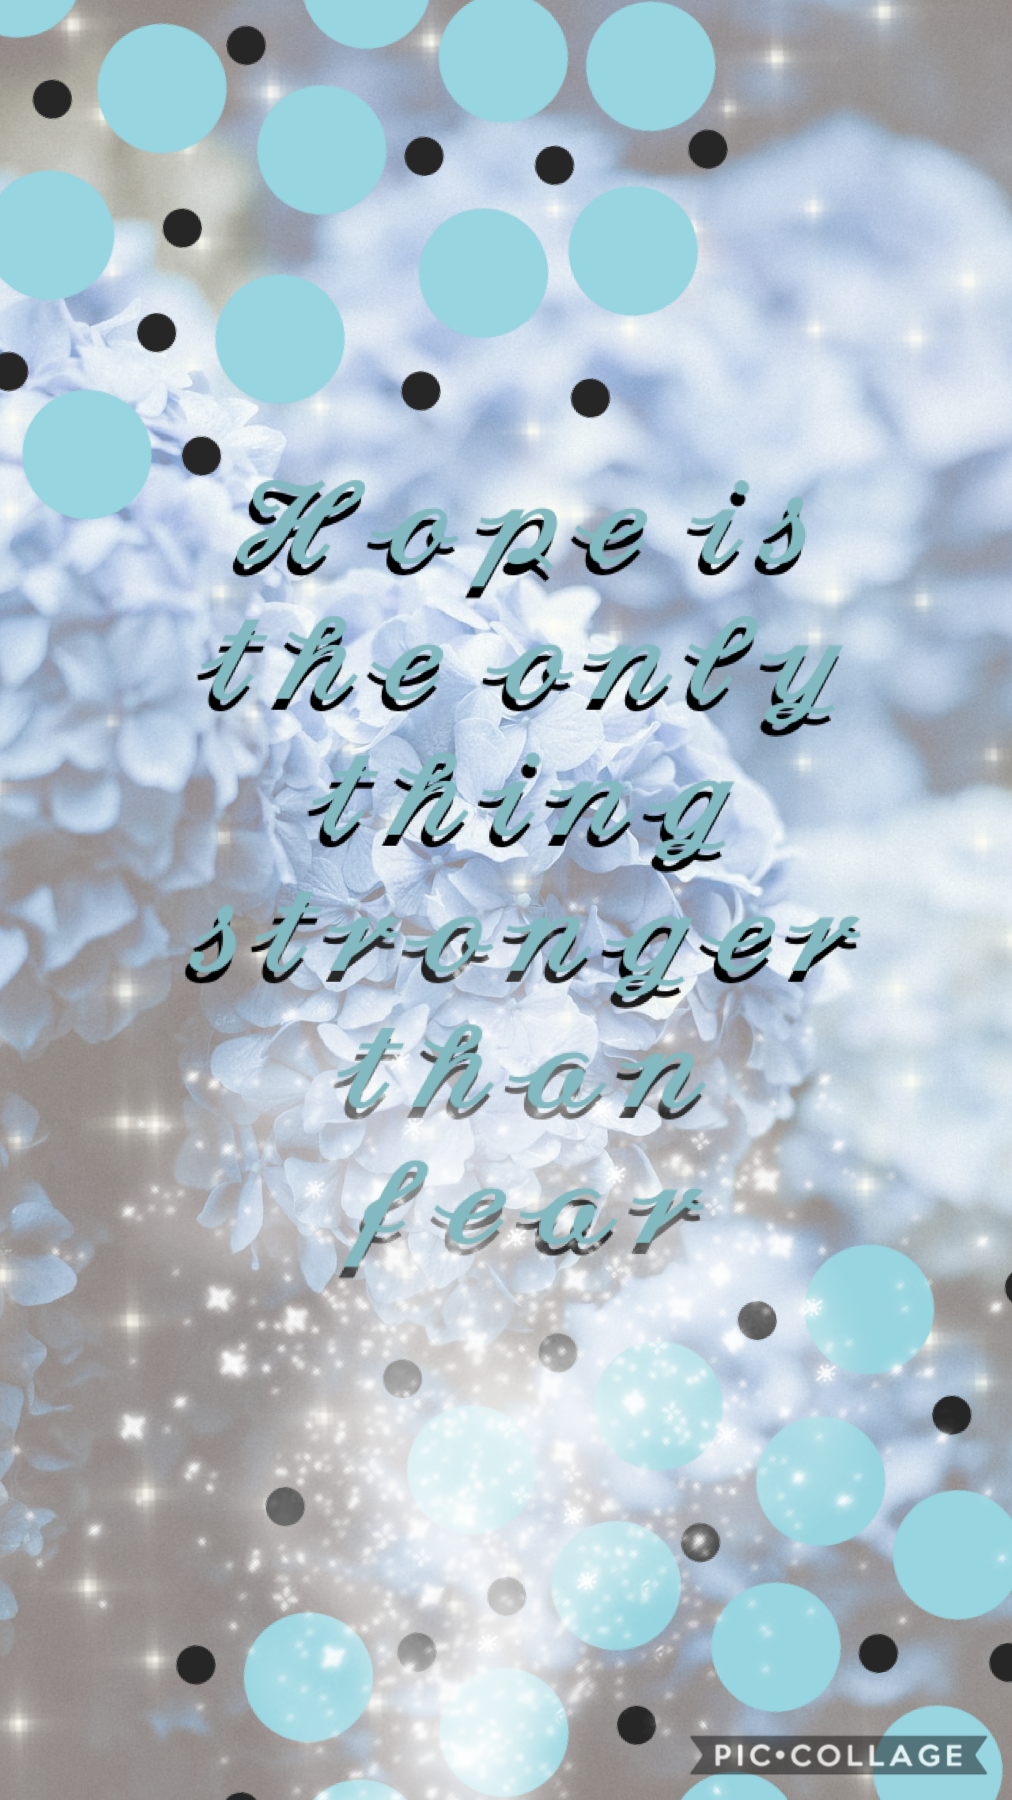 💎Tap💎
I like this quote!
What do you think?
Sry I haven’t been posting in a while. I was rly busy with moon star shines colour contest. I hope I reach 800 followers soon! Only 9 more followers 2 go!
Btw if u no any people w/ icon contests tell me! 
Have a